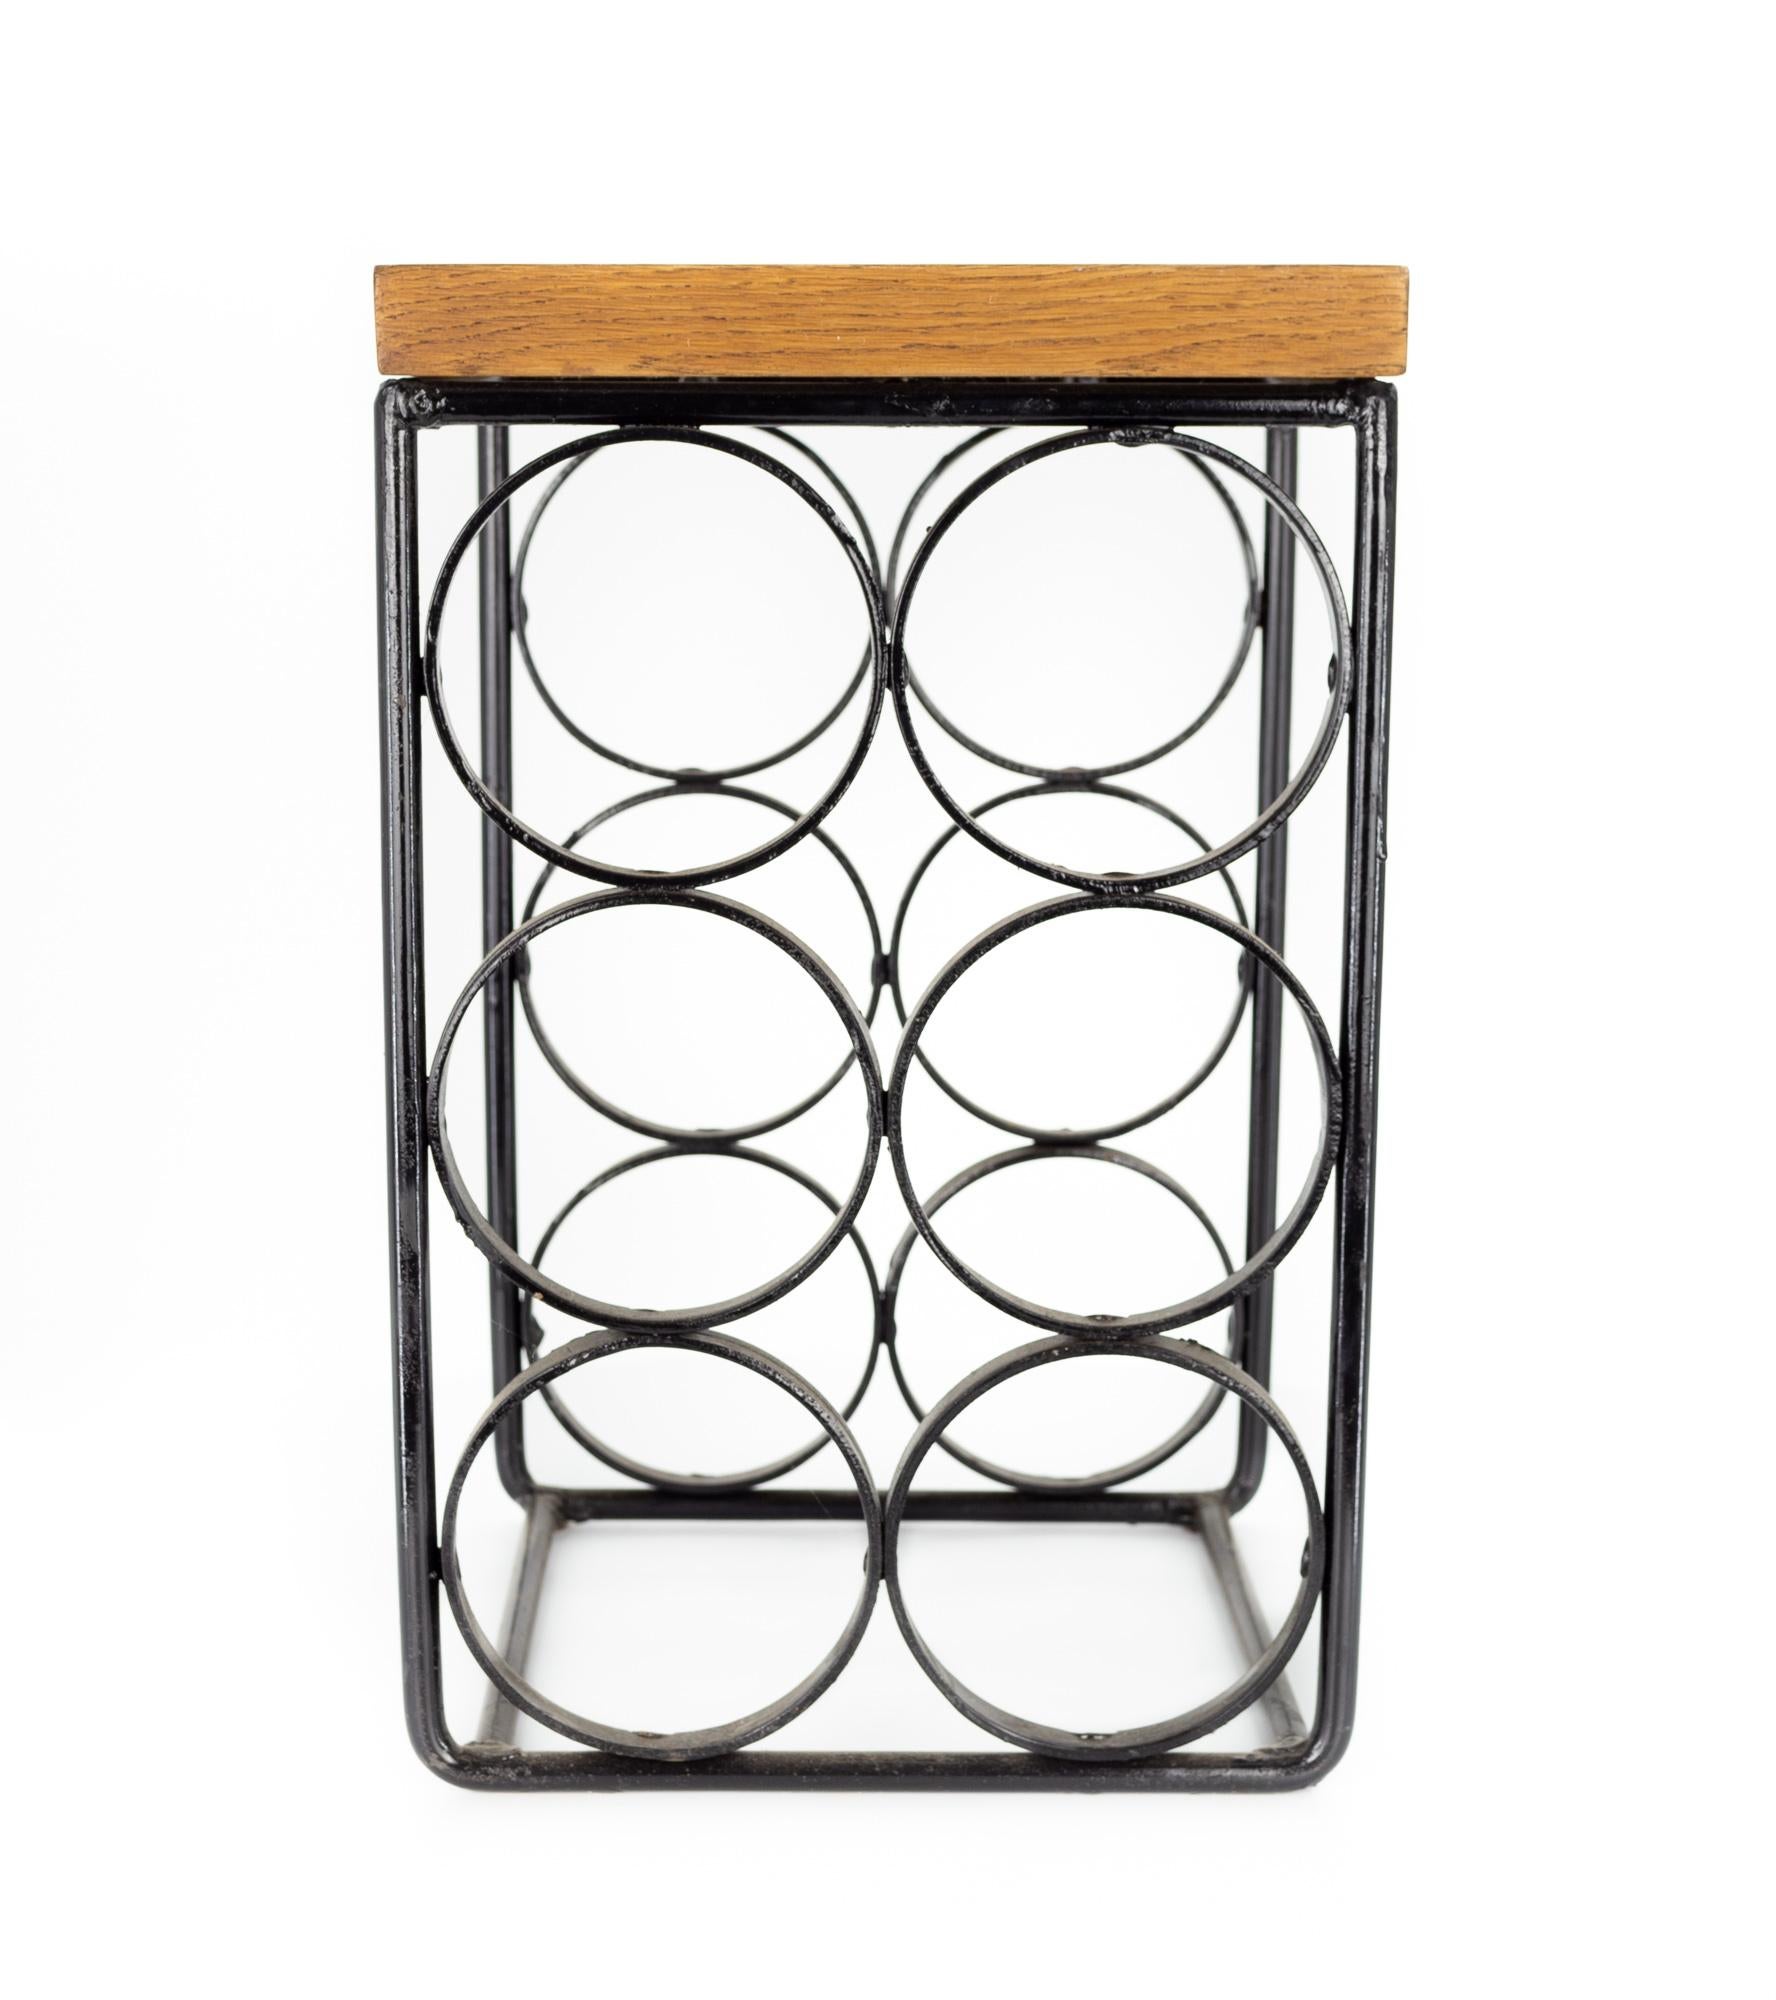 Arthur Umanoff mid century iron wine rack

The wine rack measures: 8.75 wide x 7.75 deep x 13.75 inches high 

This set is in Great Vintage Condition with minor wear.

We take our photos in a controlled lighting studio to show as much detail